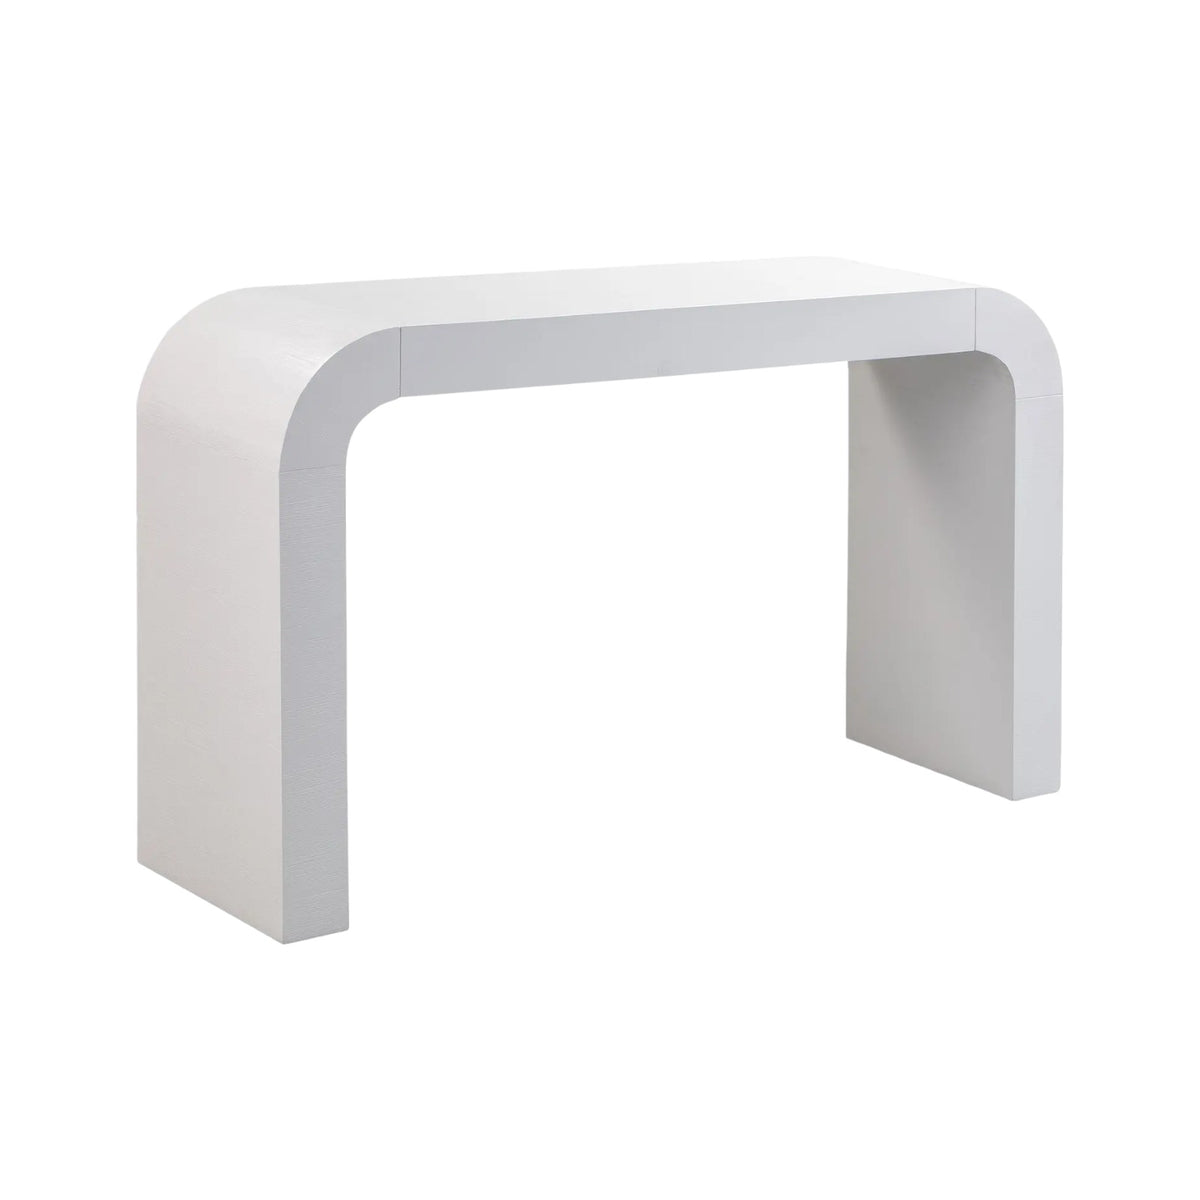 HAND MADE ATHENA WHITE HUMP CONSOLE TABLE